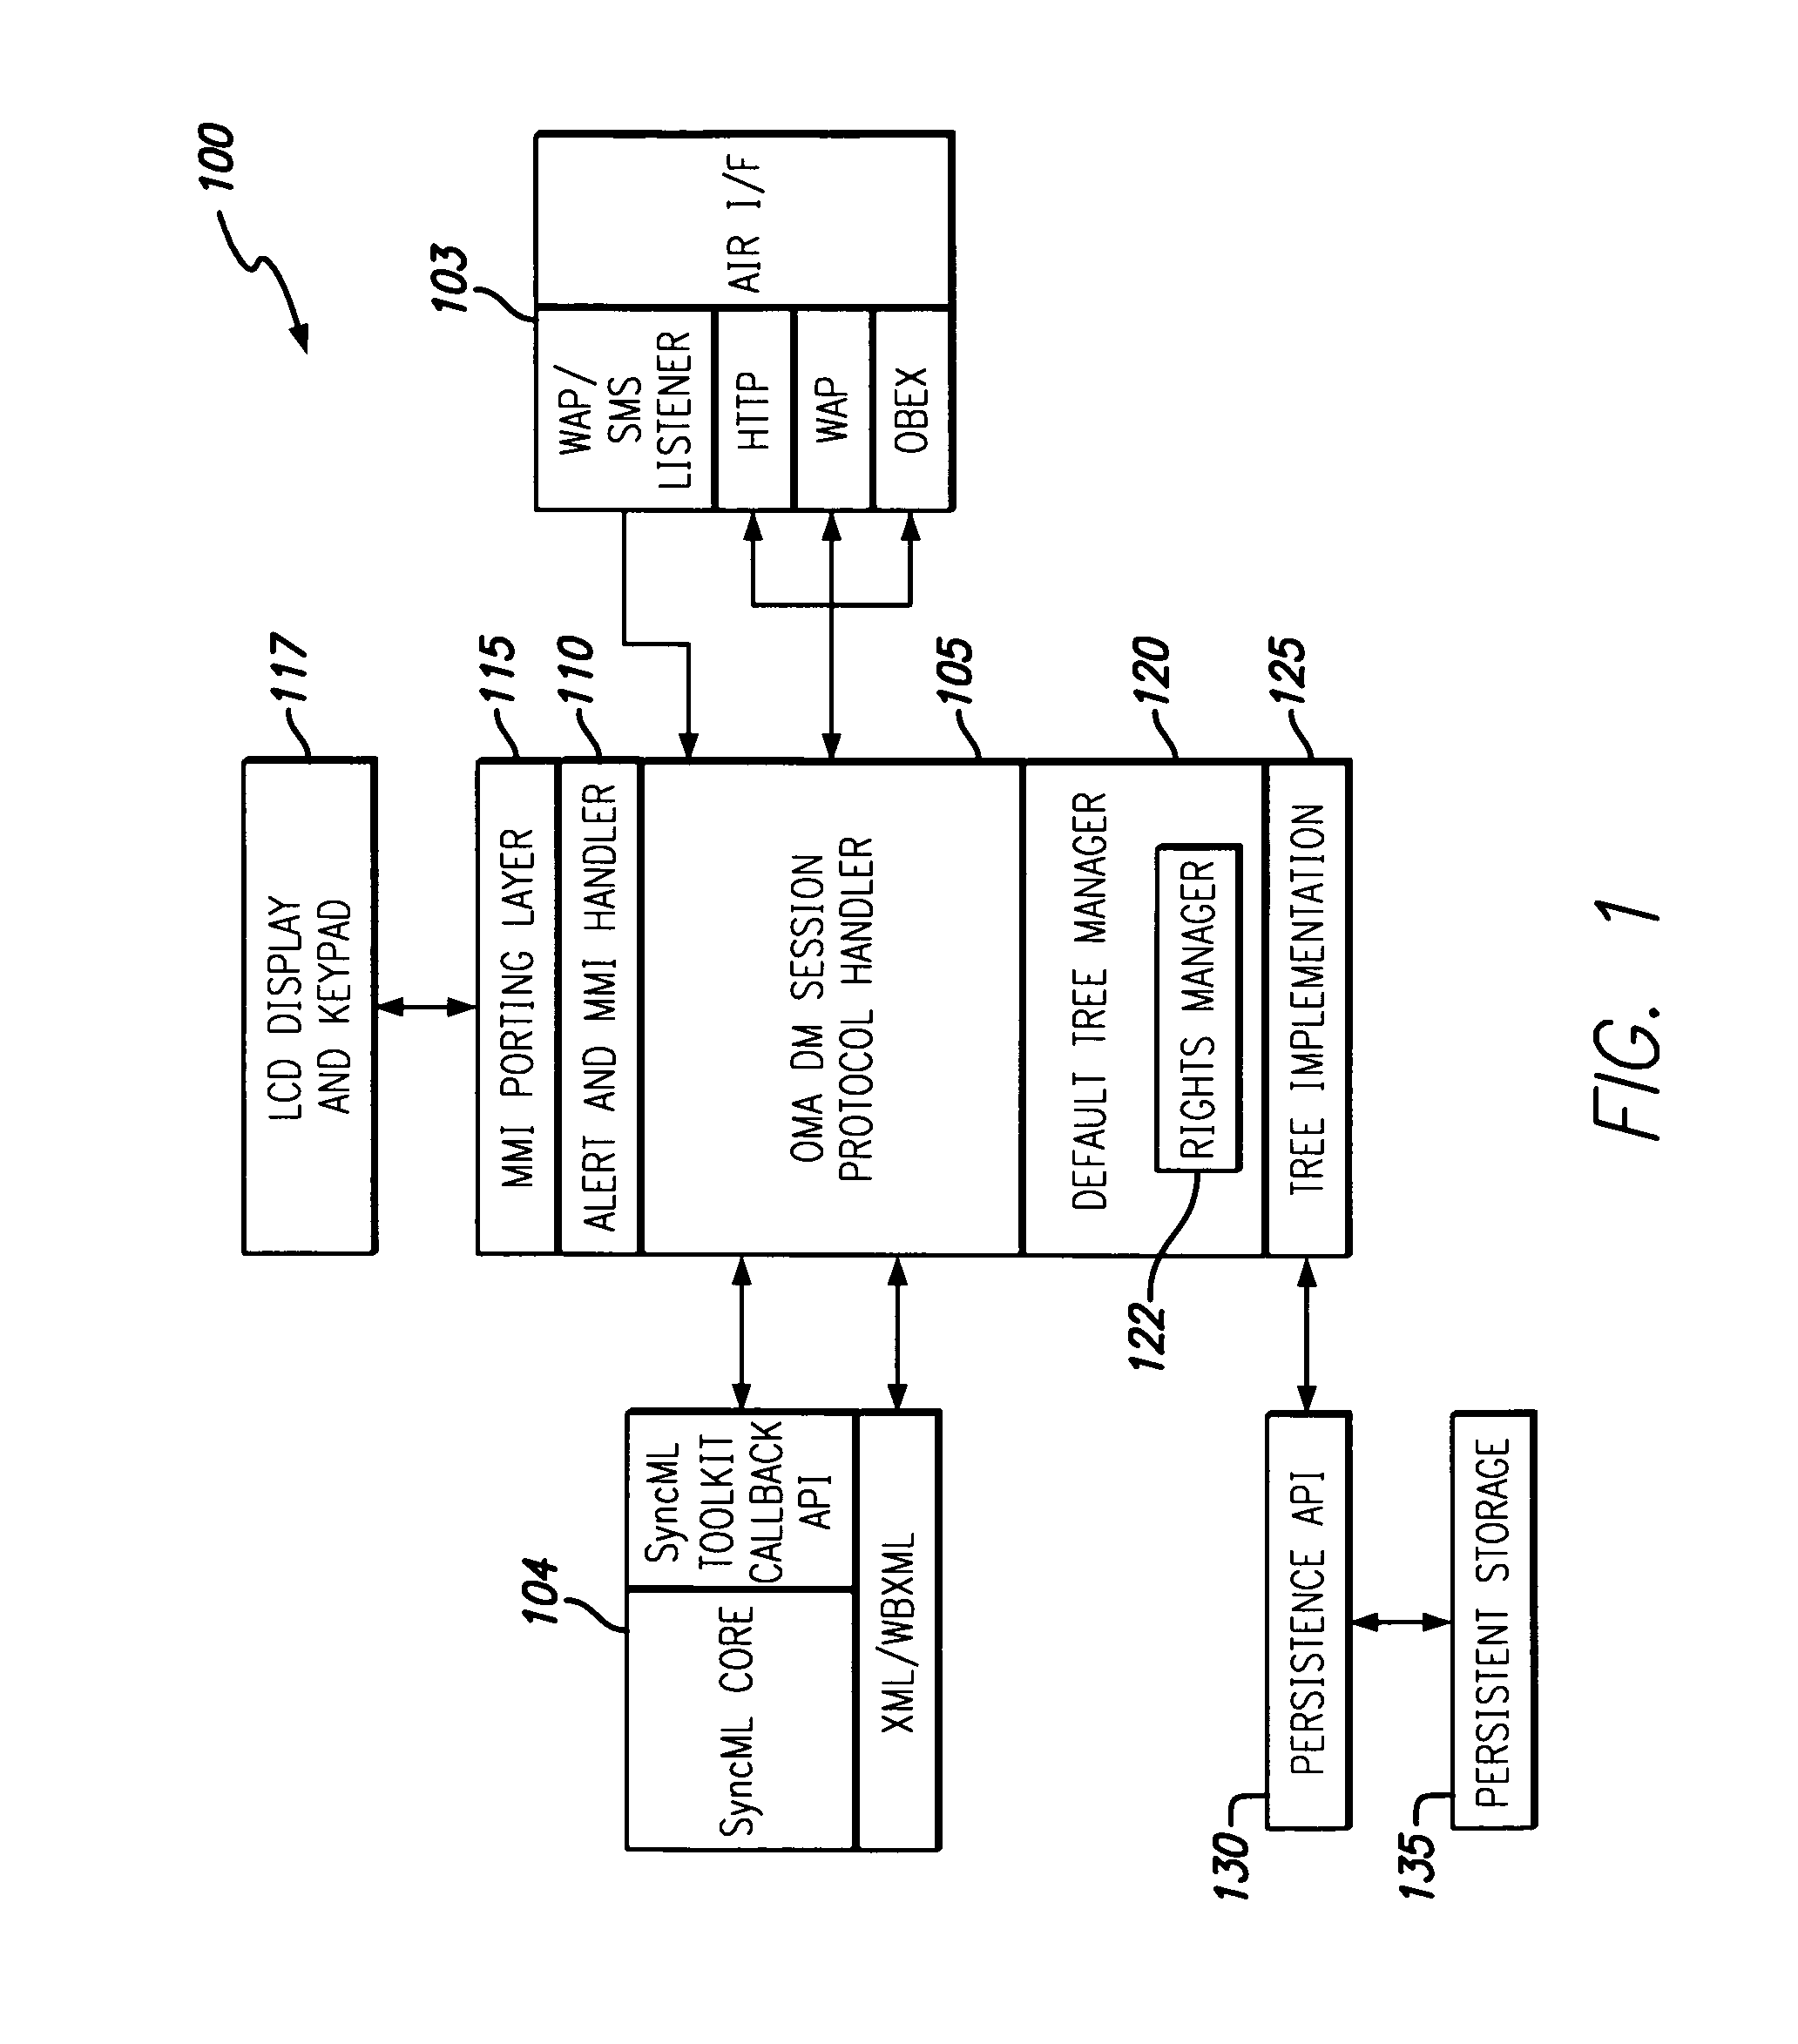 Method of receiving, storing, and providing device management parameters and firmware updates to application programs within a mobile device